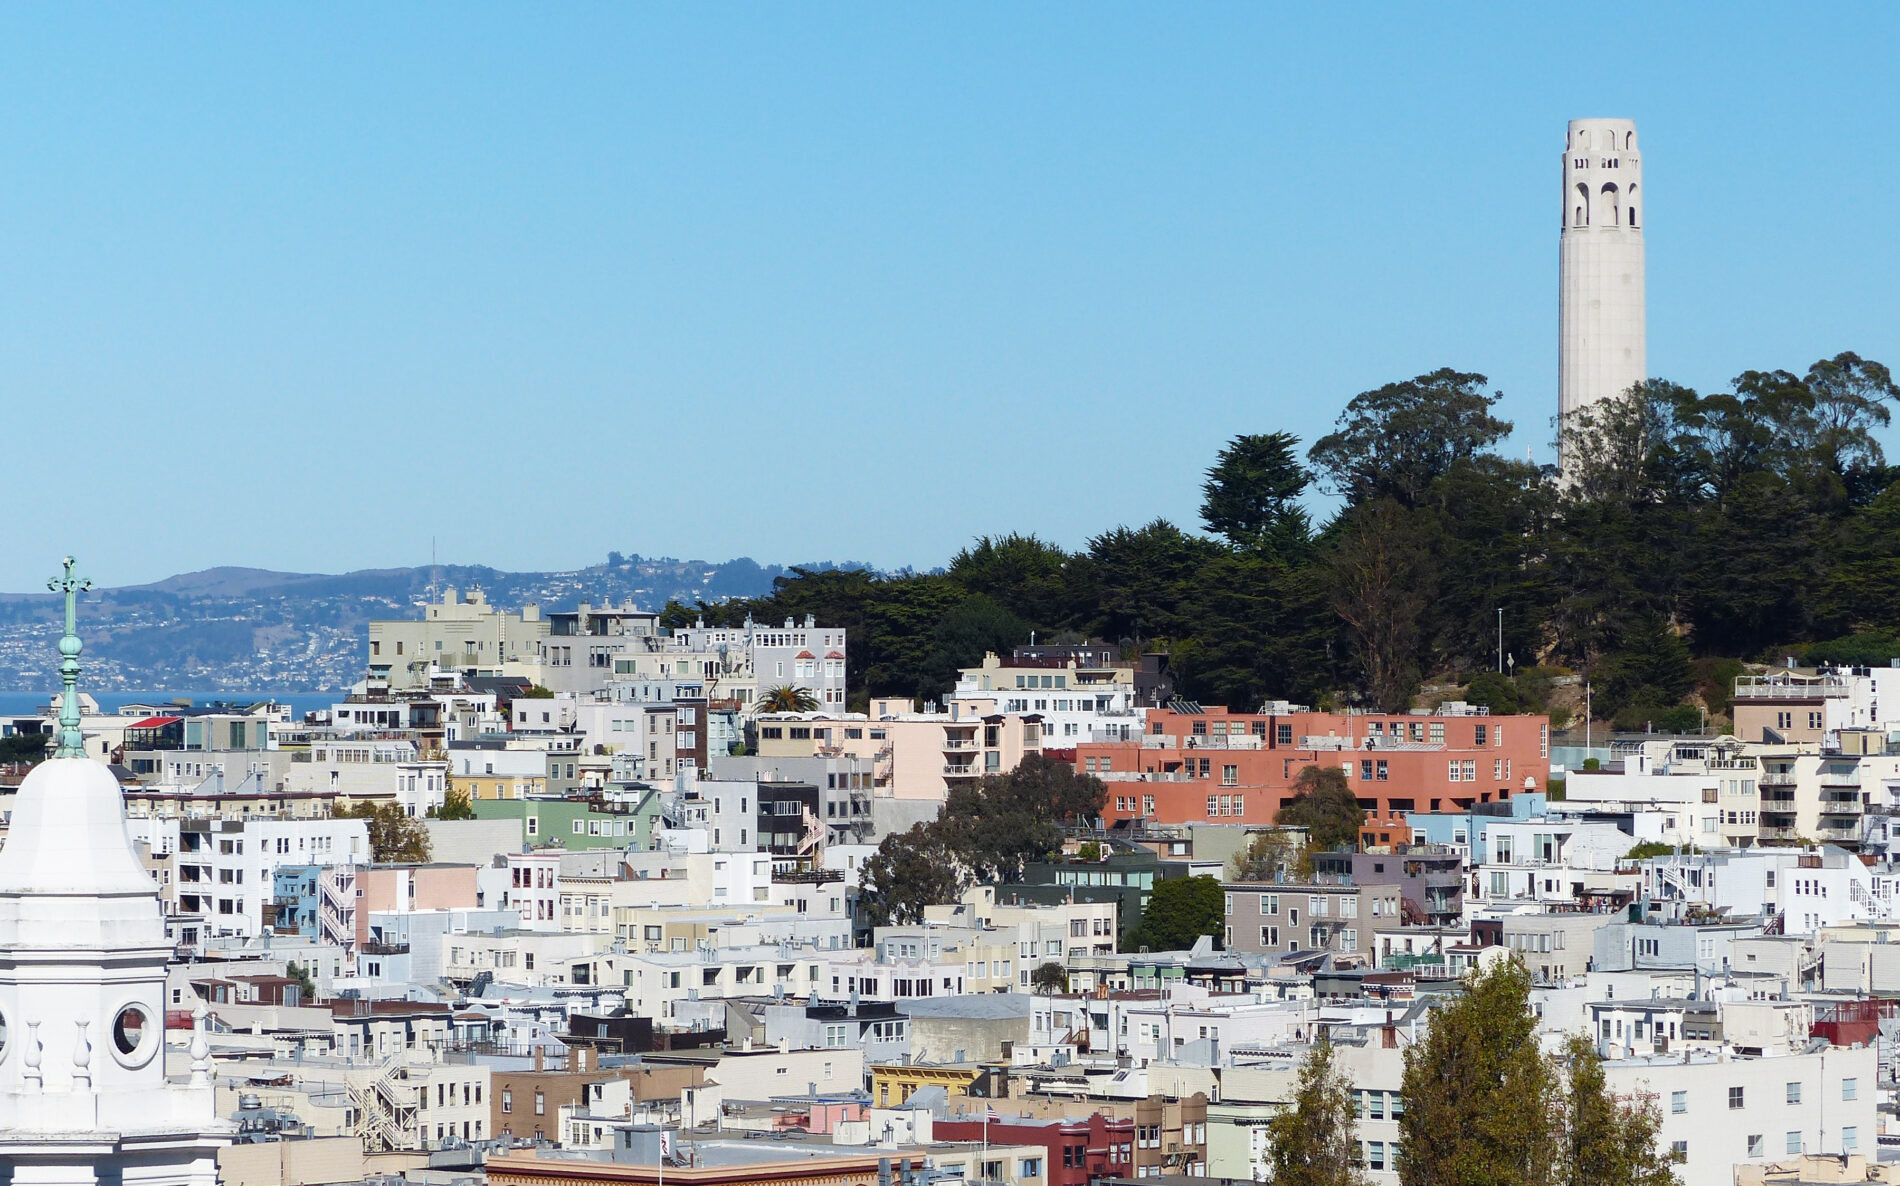 Overlooking North Beach neighborhood and Coit Tower in San Francisco.